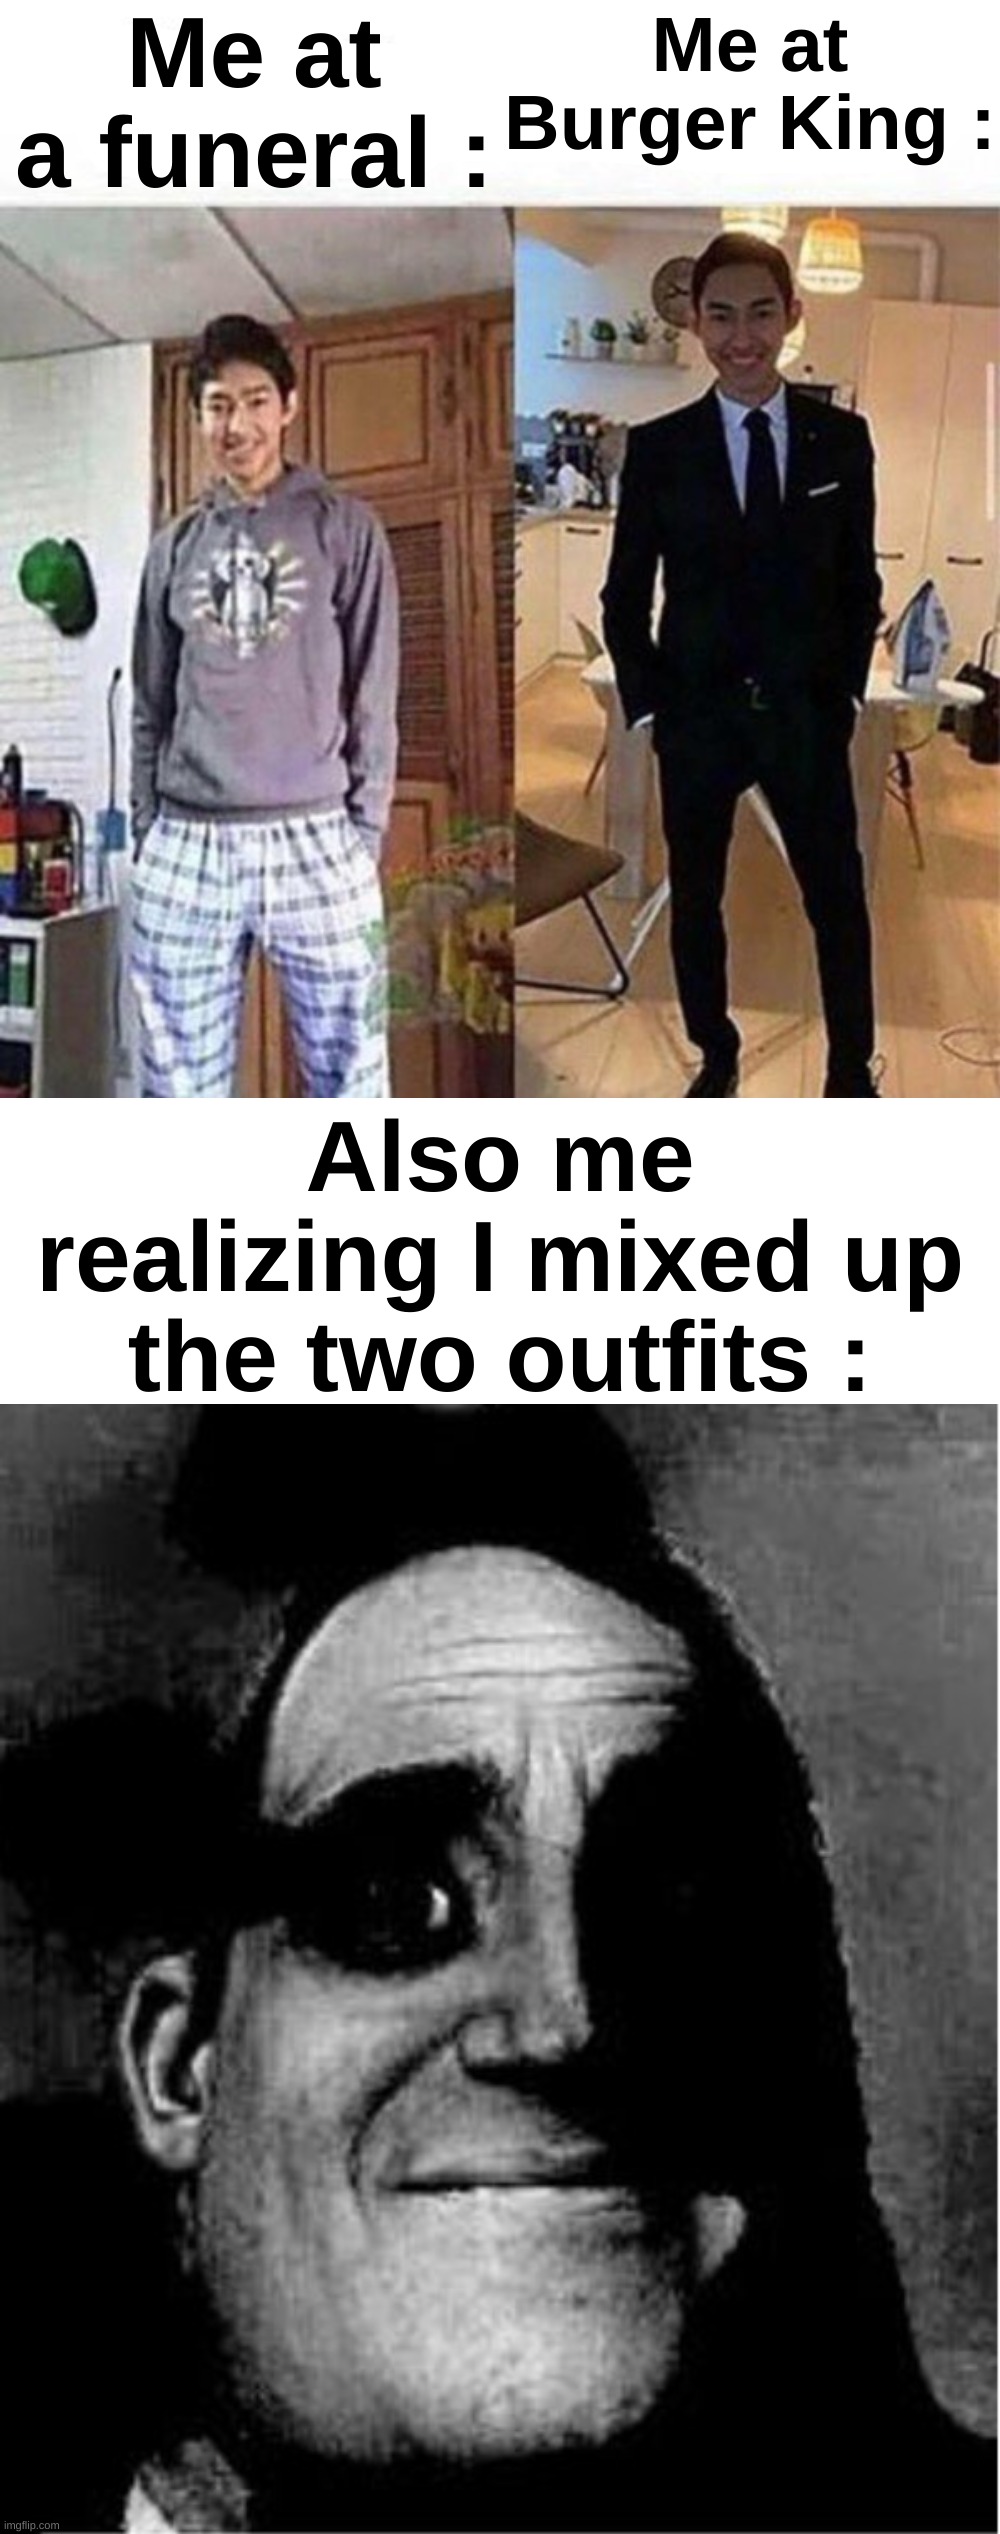 When you f**k up real bad | Me at a funeral :; Me at Burger King :; Also me realizing I mixed up the two outfits : | image tagged in memes,funny,shocking,ong,funeral,front page plz | made w/ Imgflip meme maker